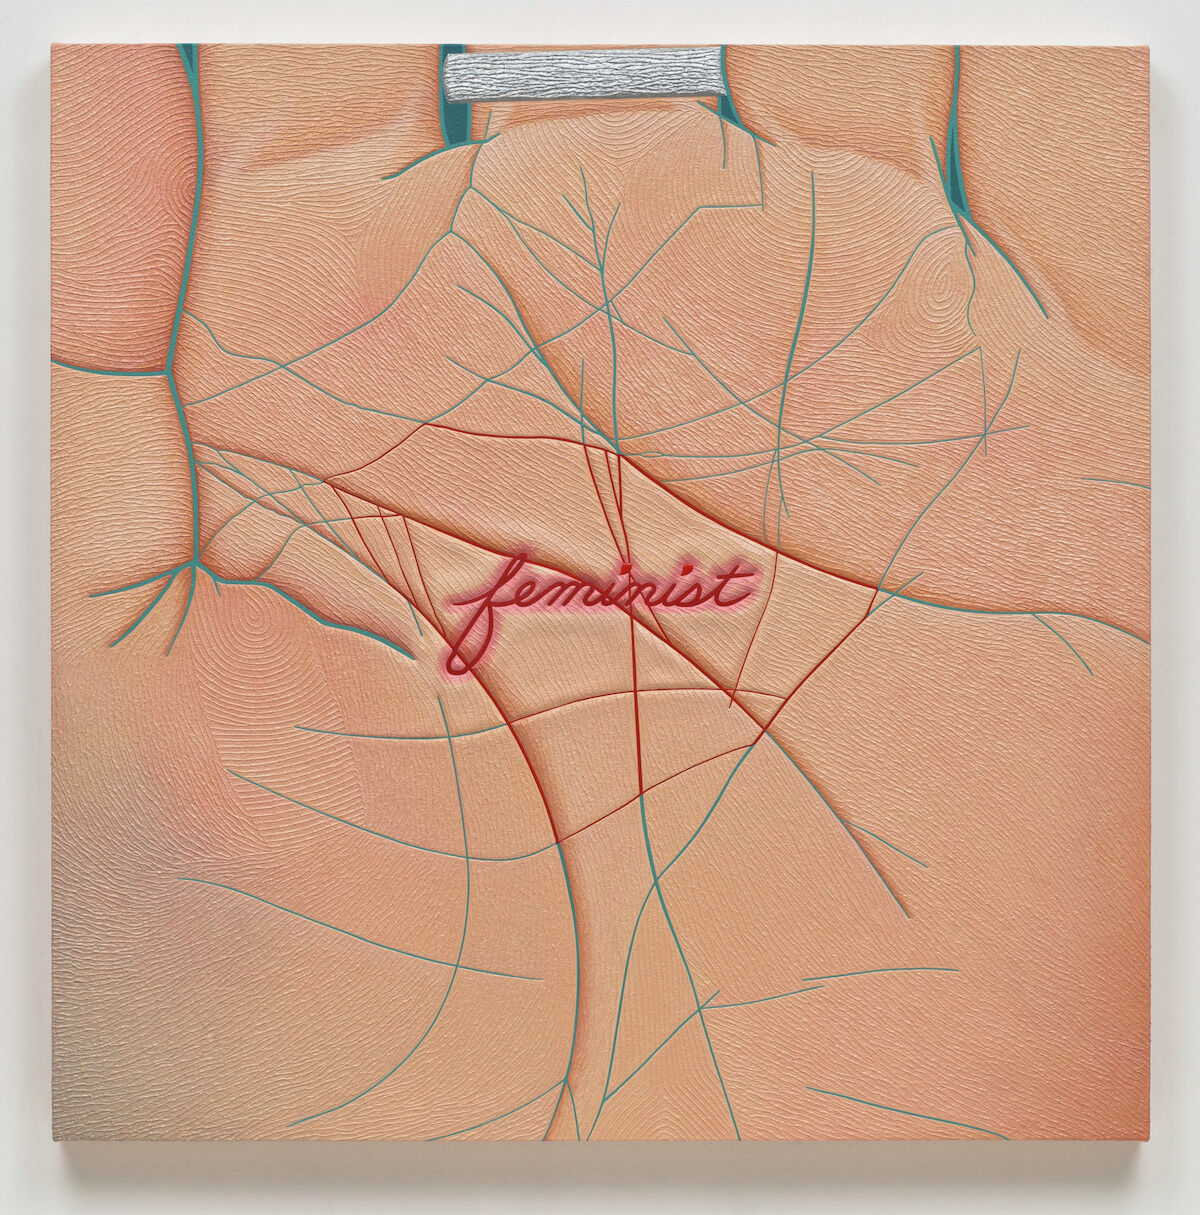 Linda Stark, Stigmata, 2011. University of California, Berkeley Art Museum and Pacific Film Archive; purchase made possible through a gift of the Paul L. Wattis Foundation. Courtesy University of California, Berkeley Art Museum and Pacific Film Archive.